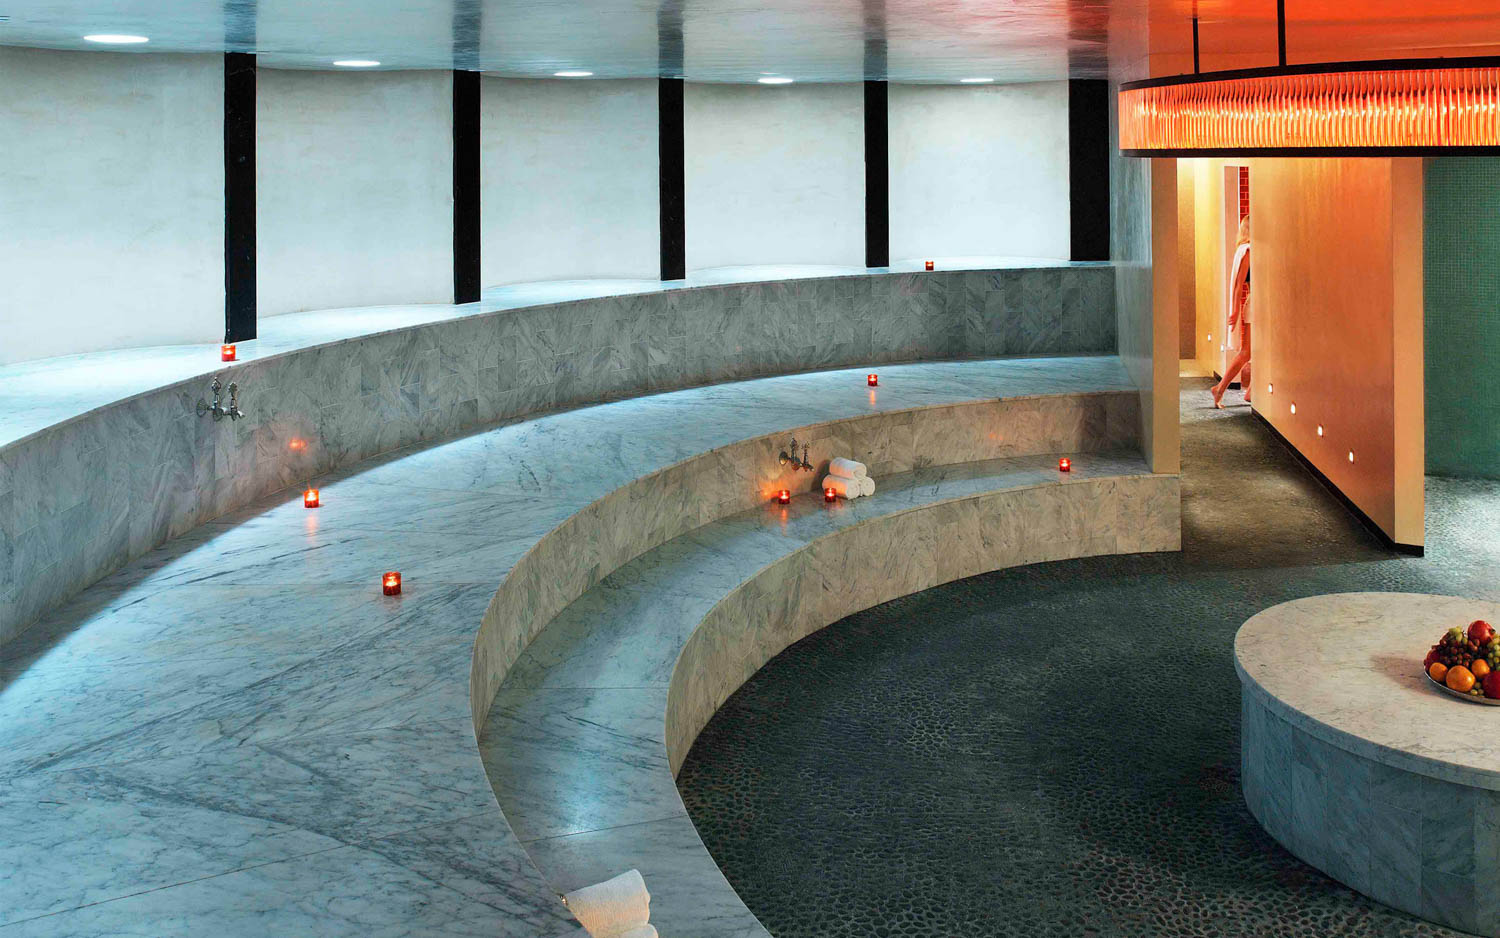 The spa at Miami Standard Hotel melds the traditional with the holistic, with various treatments from facials and massages to astrology and health coaching